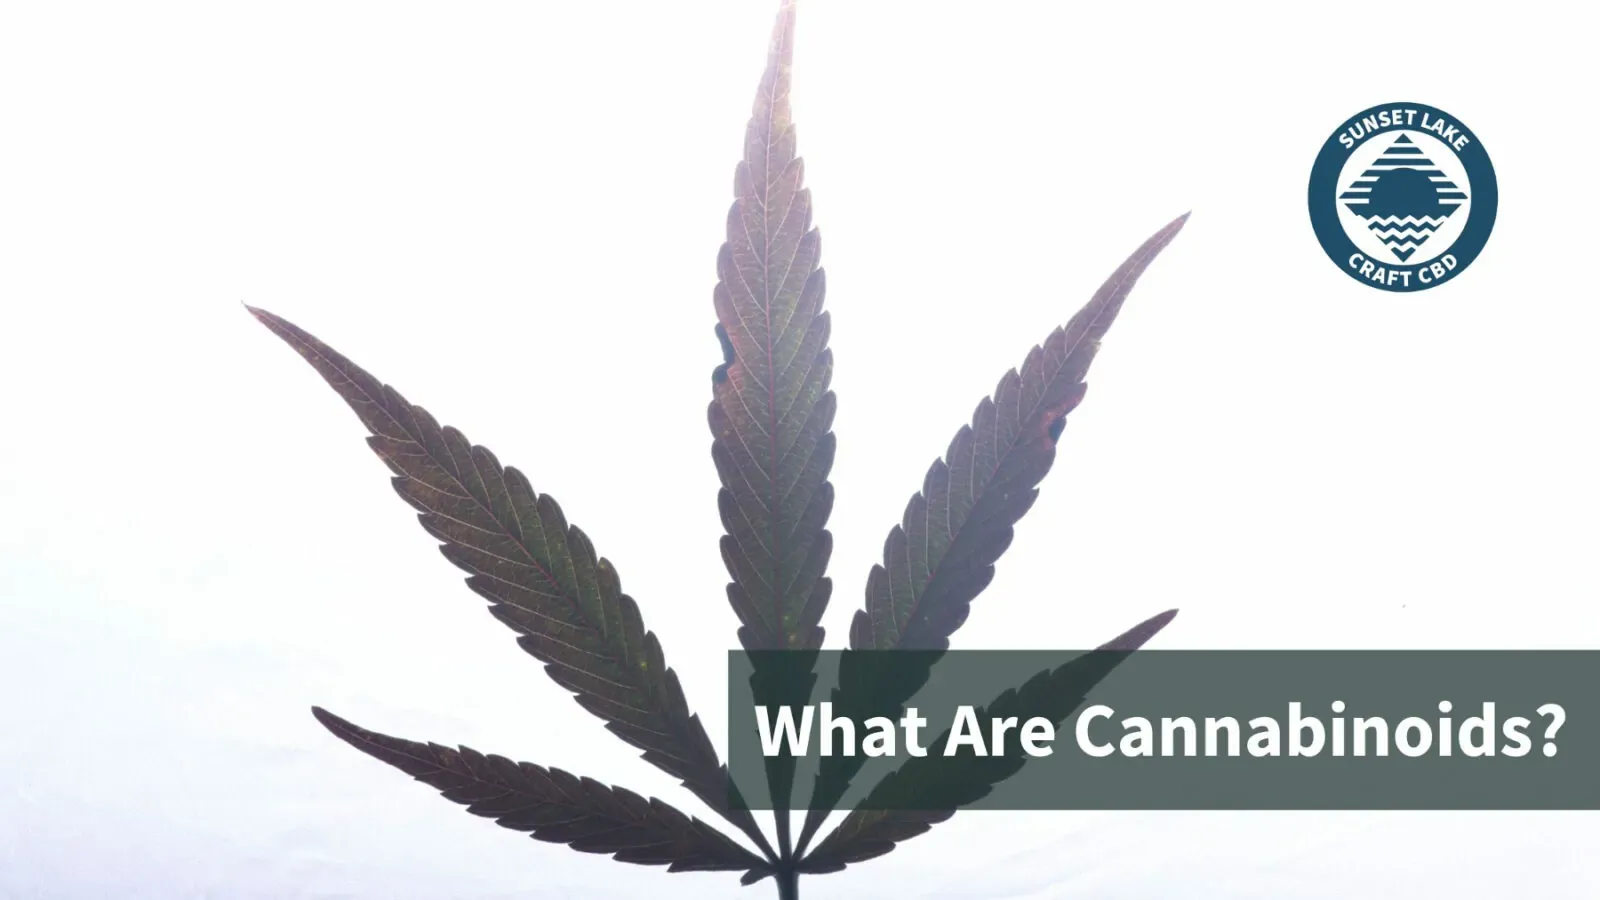 A cannabis leaf outline with the text "What are cannabinoids?"